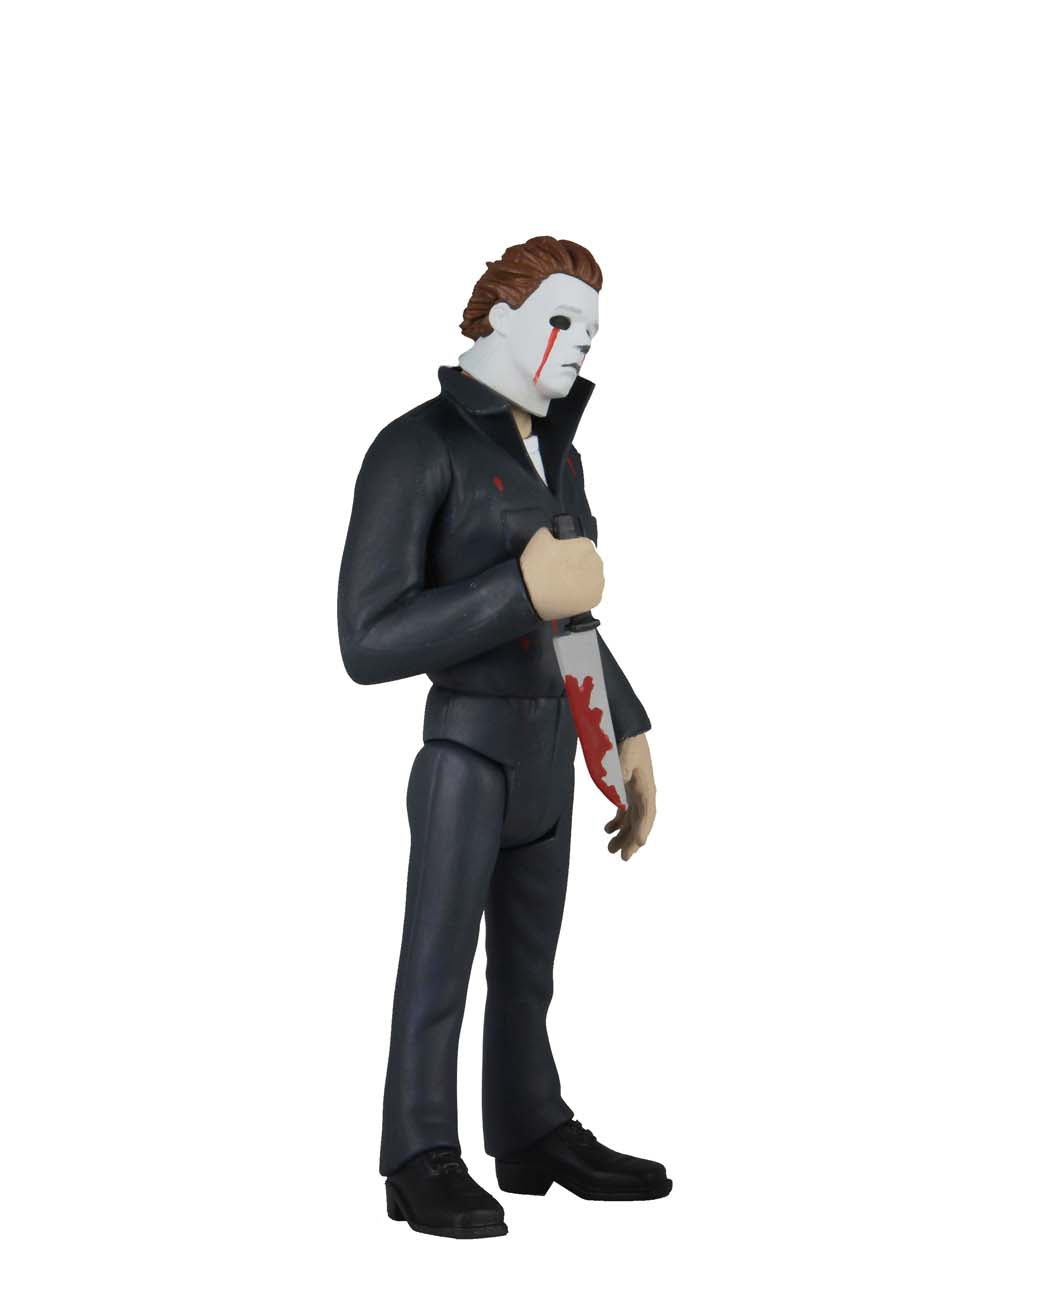 This is NECA Toony Terror Series 5 Halloween 2 Michael Myers and he has blood tears and is holding a bloody knife.